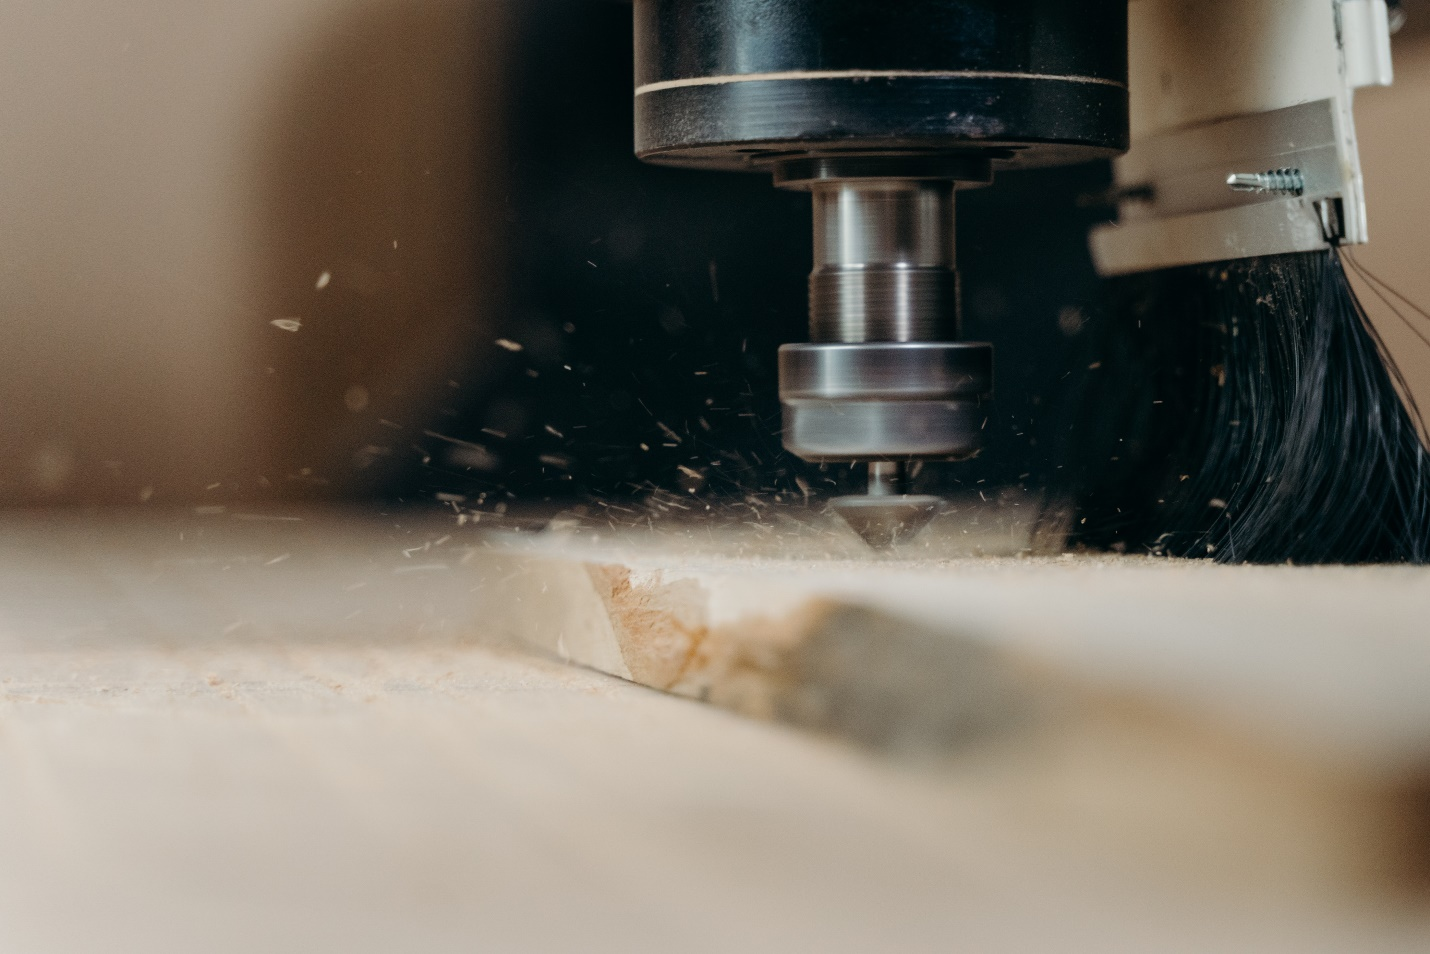 A CNC machine creating prototypes rapidly.